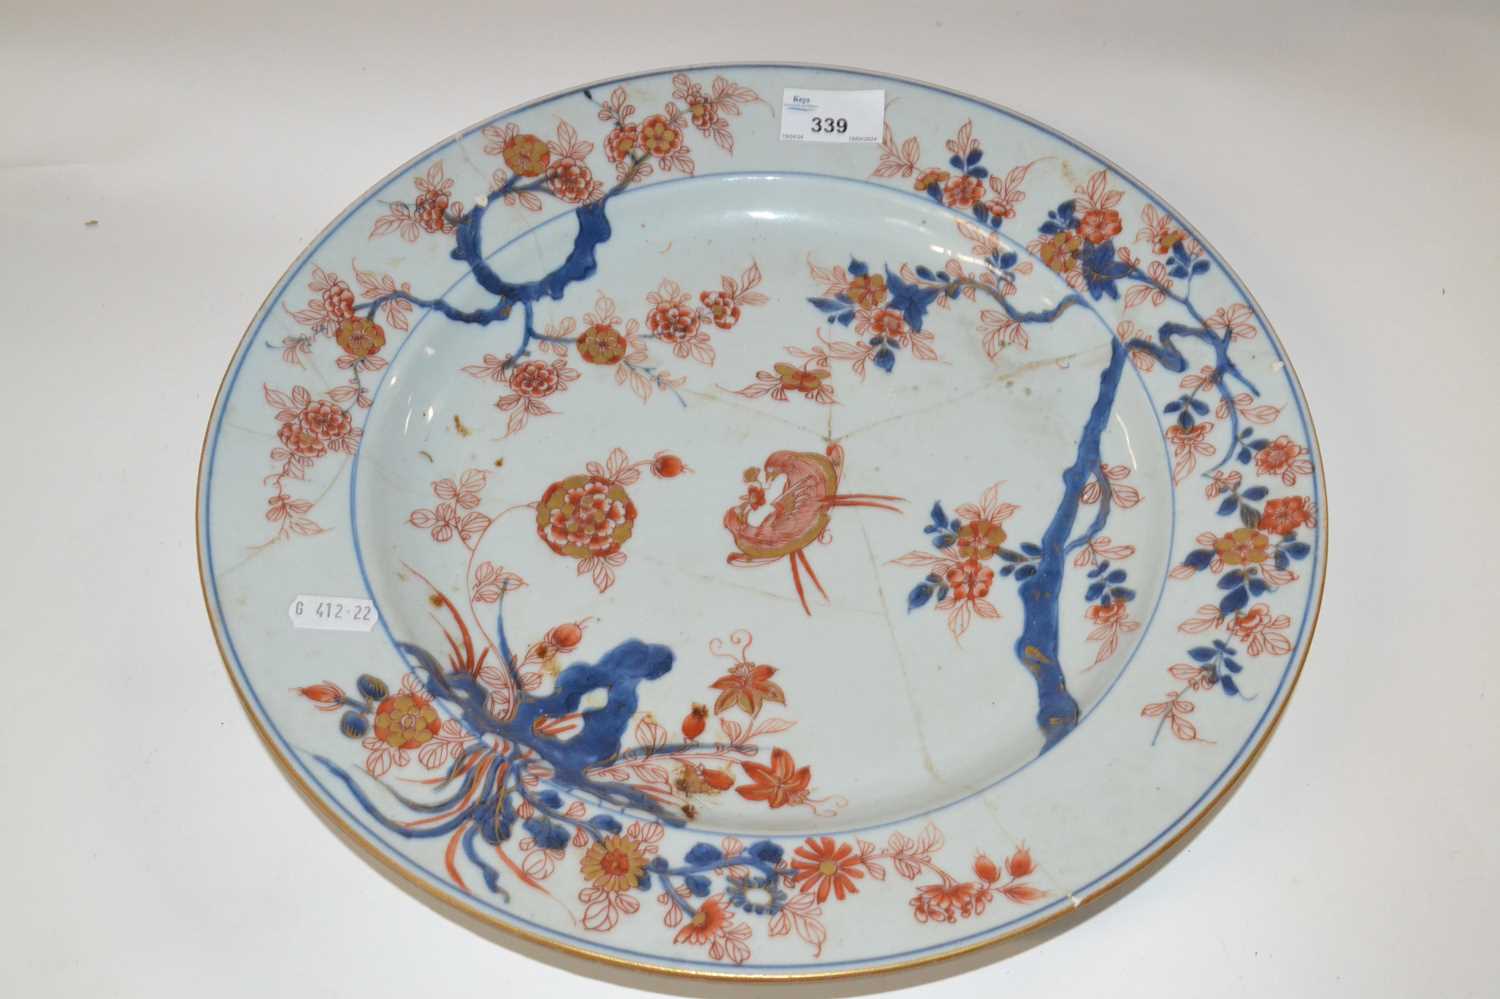 An 18th Century Chinese porcelain charger, Qianlong period, decorated in Imari style (broken and